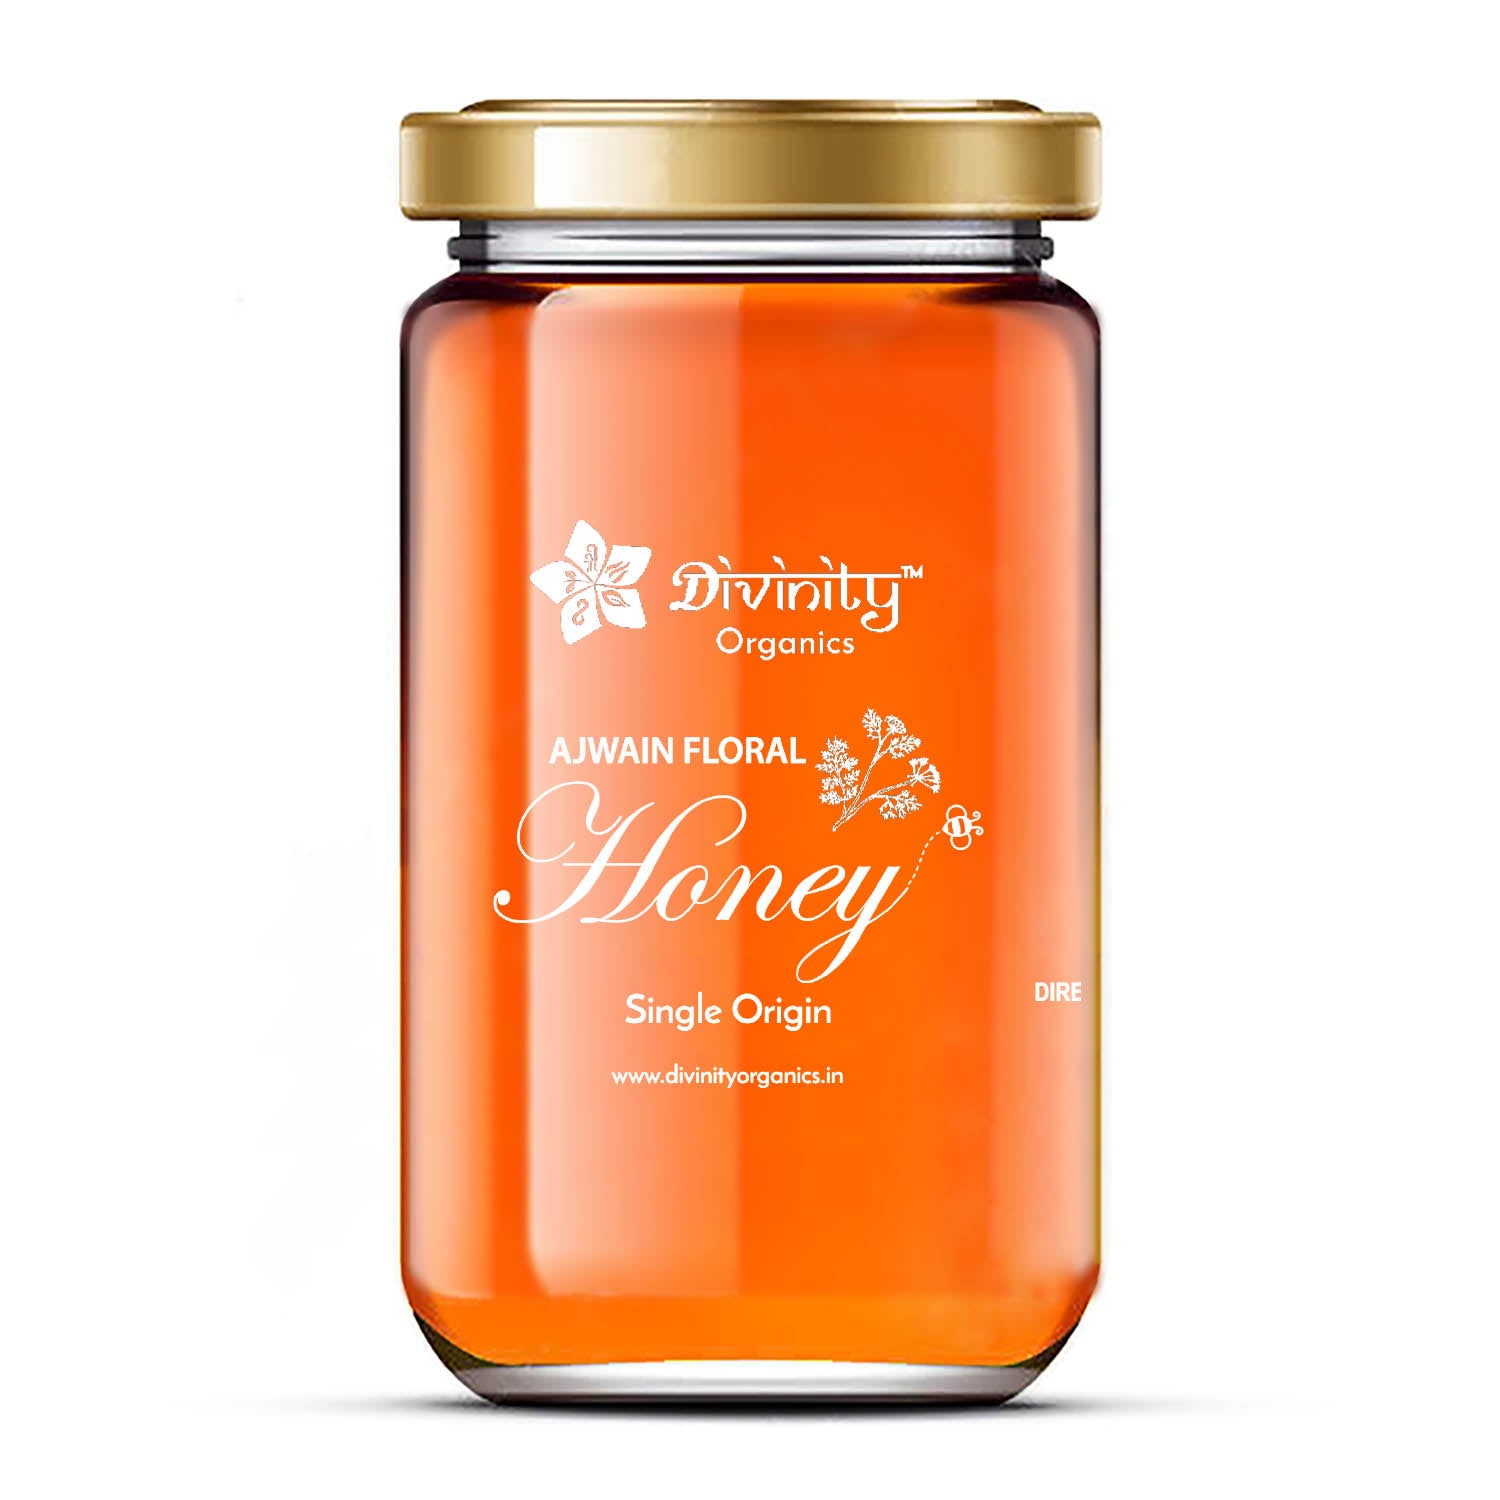 Divinity Organics Ajwain Floral Honey -With the goodness of ajwain and the rich taste of honey, Ajwain honey is made from ajwain flowers harvested from the interiors of Western Madhya Pradesh and Rajasthan. The healing properties of ajwain like aiding digestion, regulating acidity and fighting arthritis pain mixed with the sweet taste of the flower nectar makes this honey the perfect sweet treat. This honey is very dark in colour with a higher viscosity due to its thick texture.